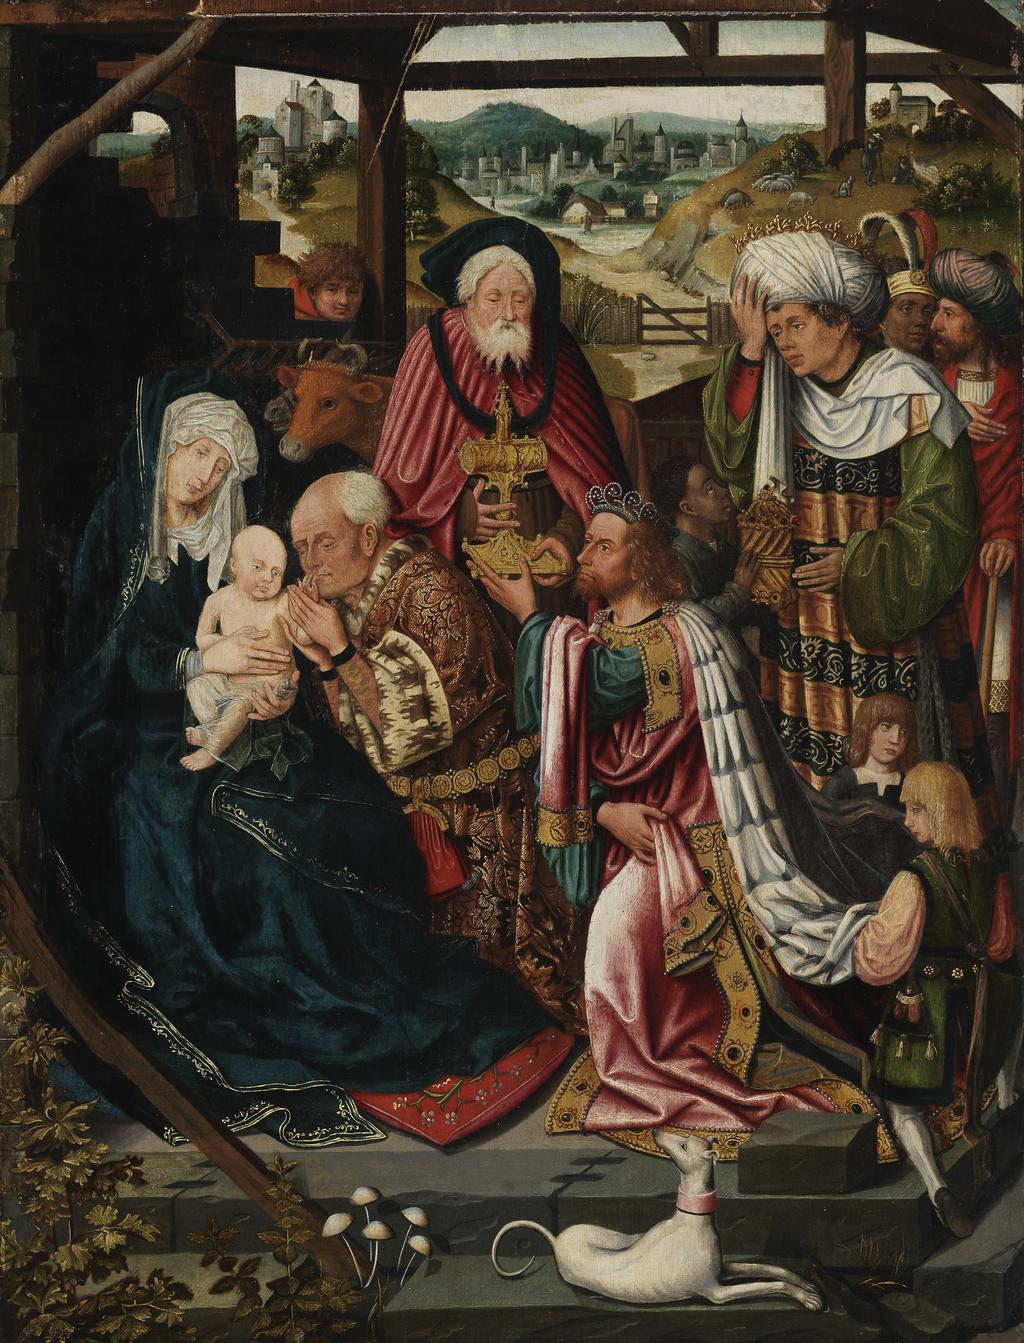 An image of Adoration of the Kings. Dutch School. Oil on panel, height 61.6 cm, width 47.5 cm, circa 1520.